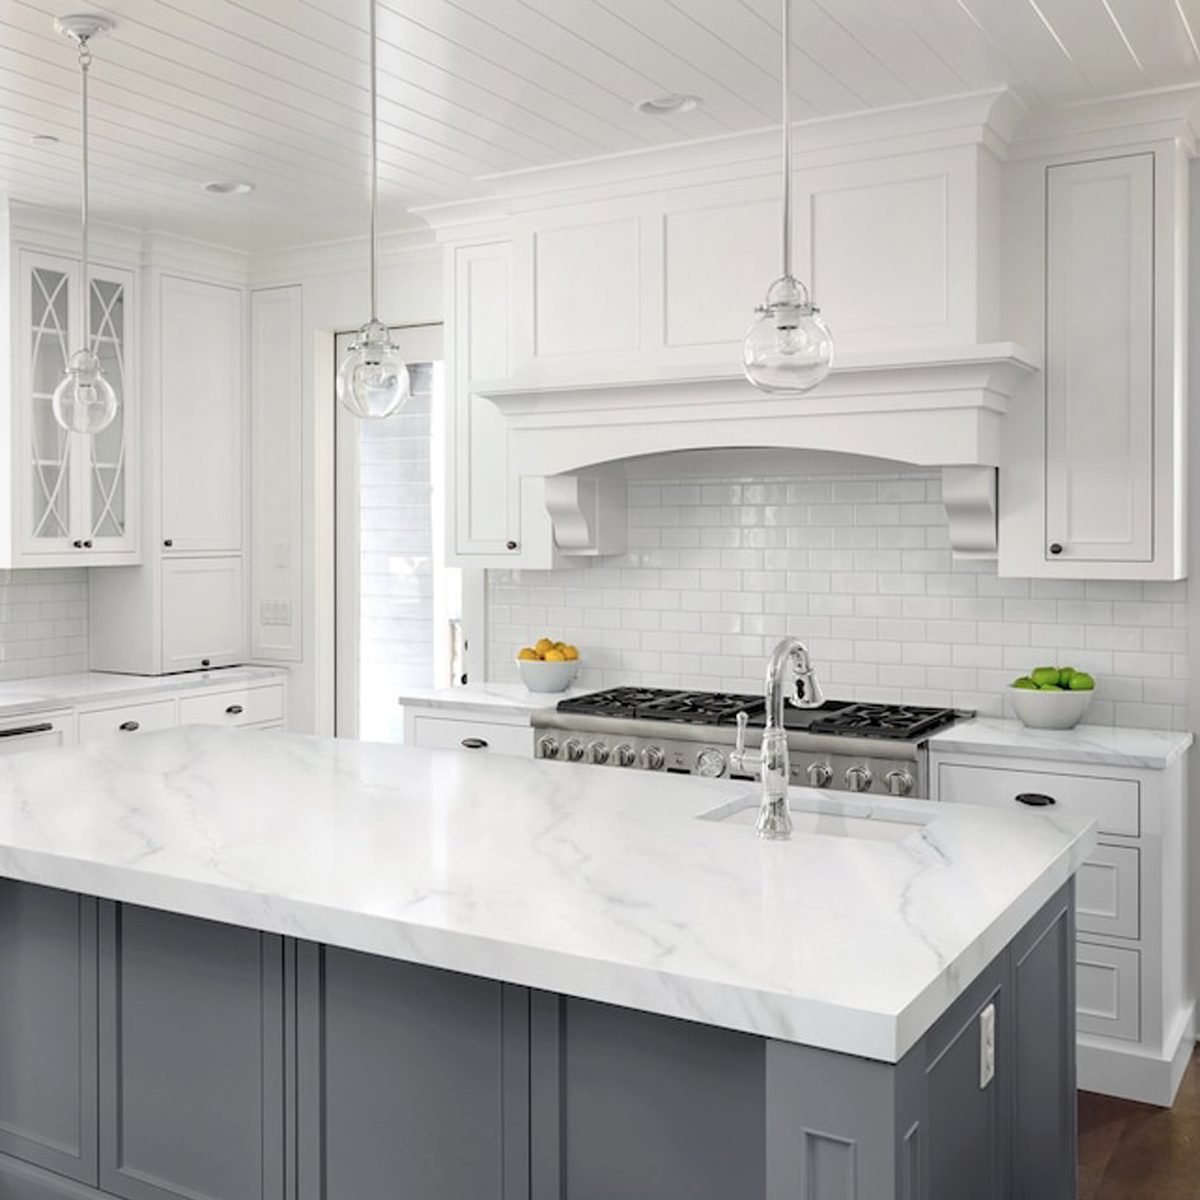 The Best Countertop Paint and Refinishing Kits | The Family Handyman